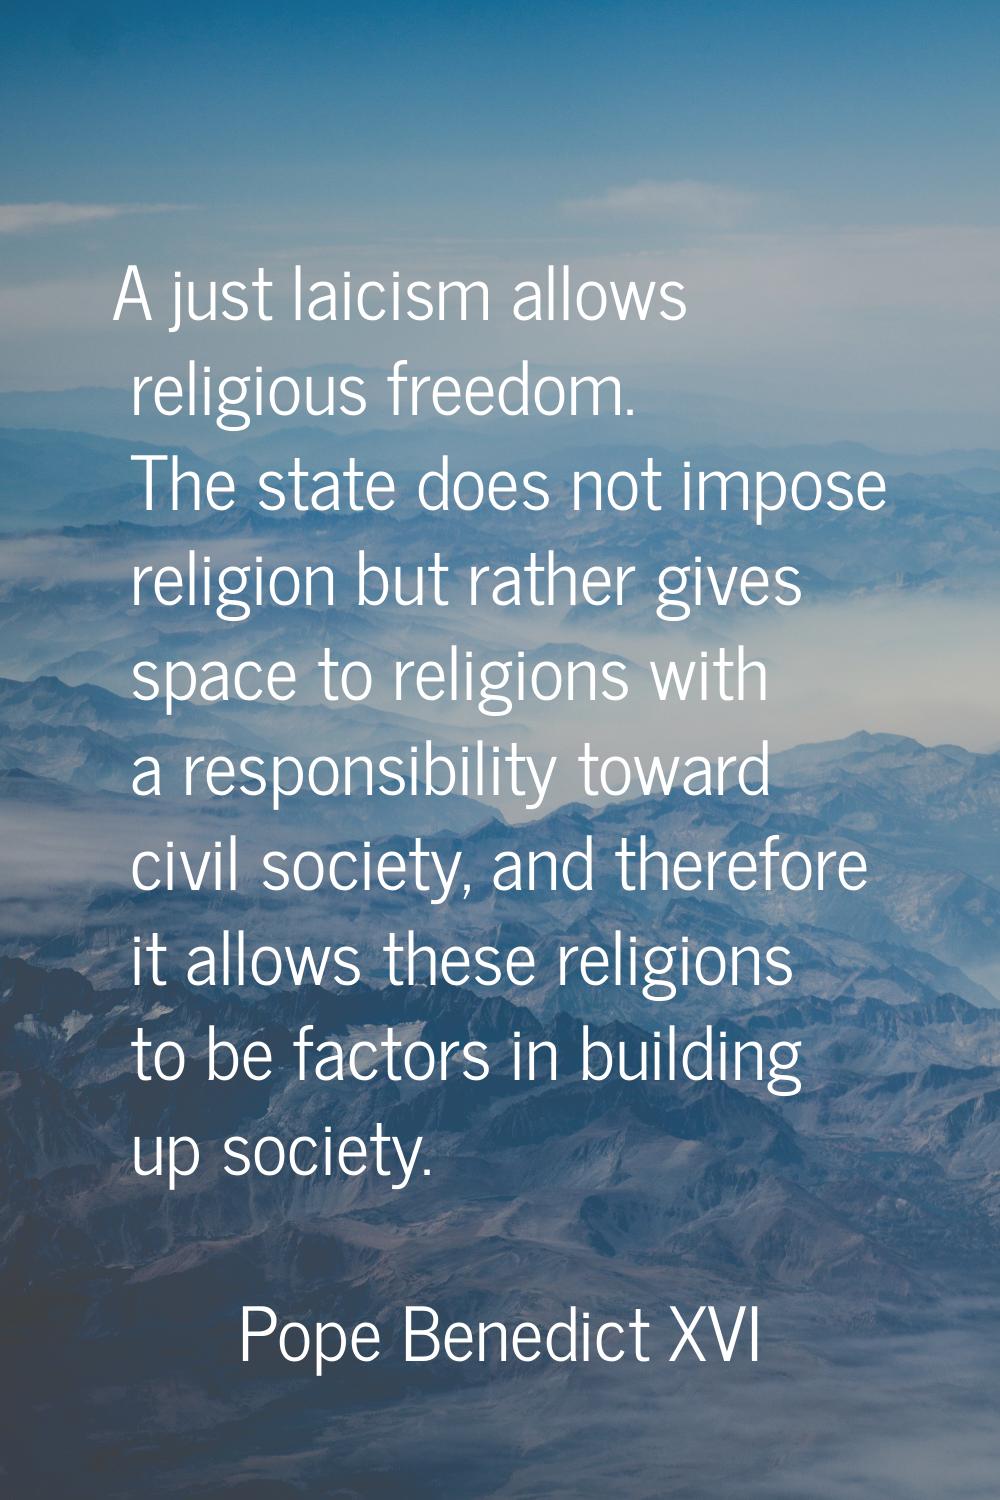 A just laicism allows religious freedom. The state does not impose religion but rather gives space 